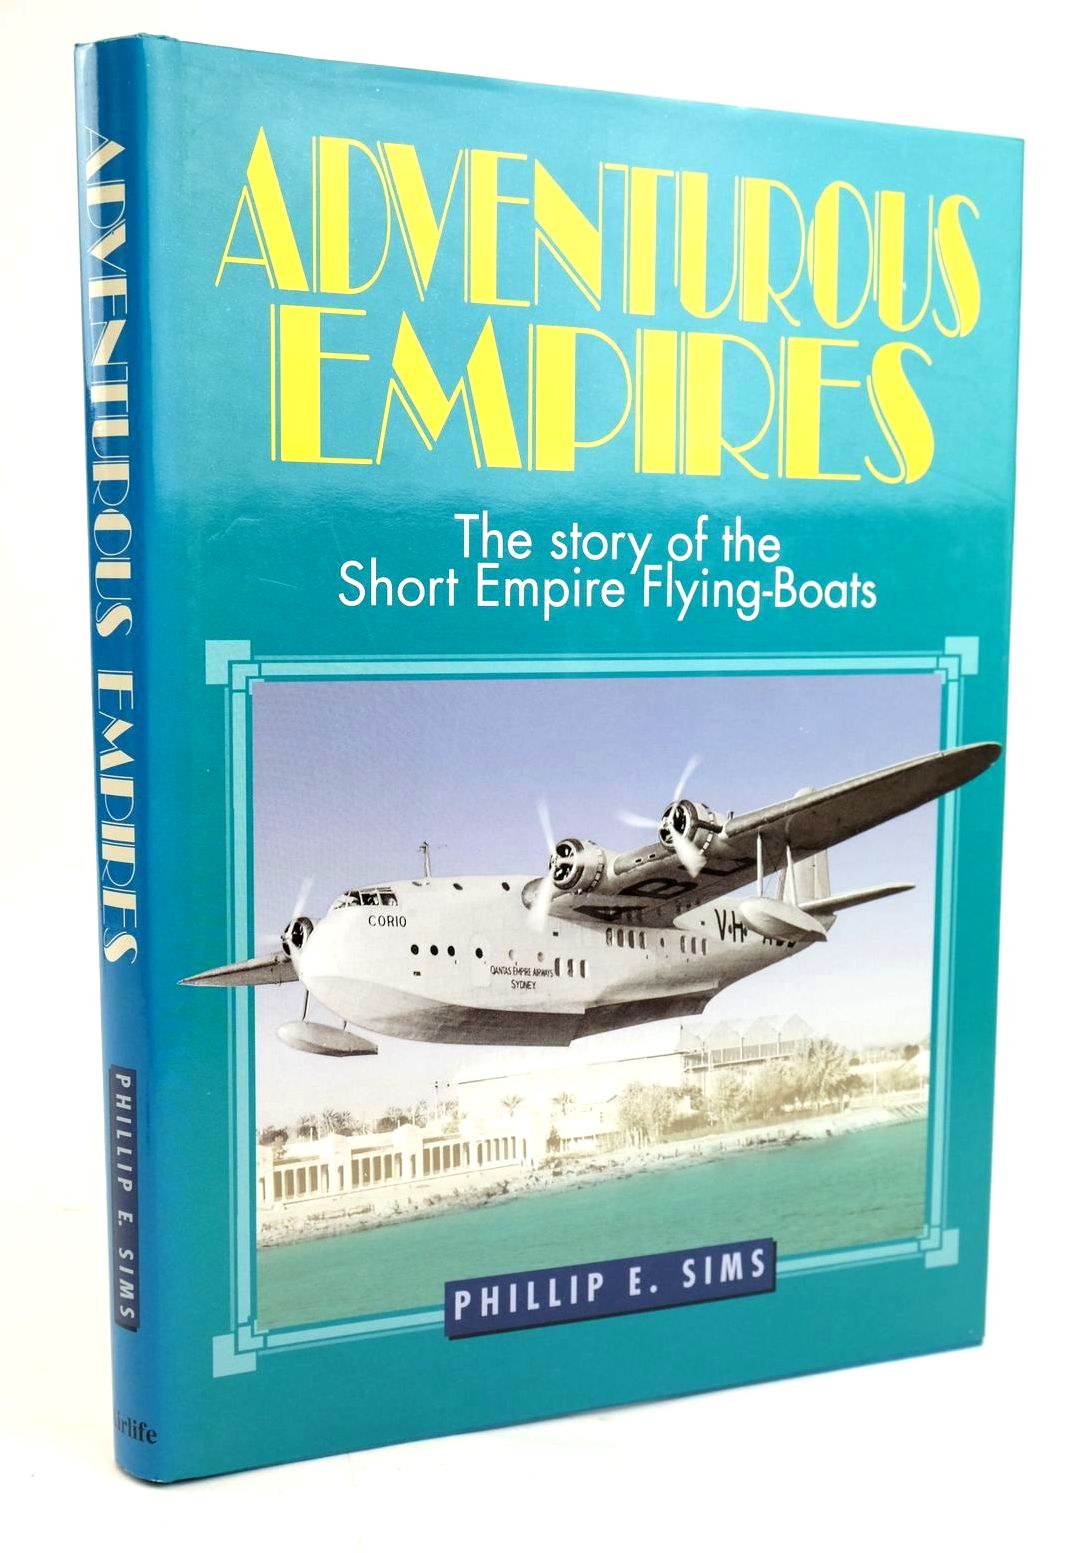 Photo of ADVENTUROUS EMPIRES written by Sims, Phillip E. published by Airlife (STOCK CODE: 1319615)  for sale by Stella & Rose's Books